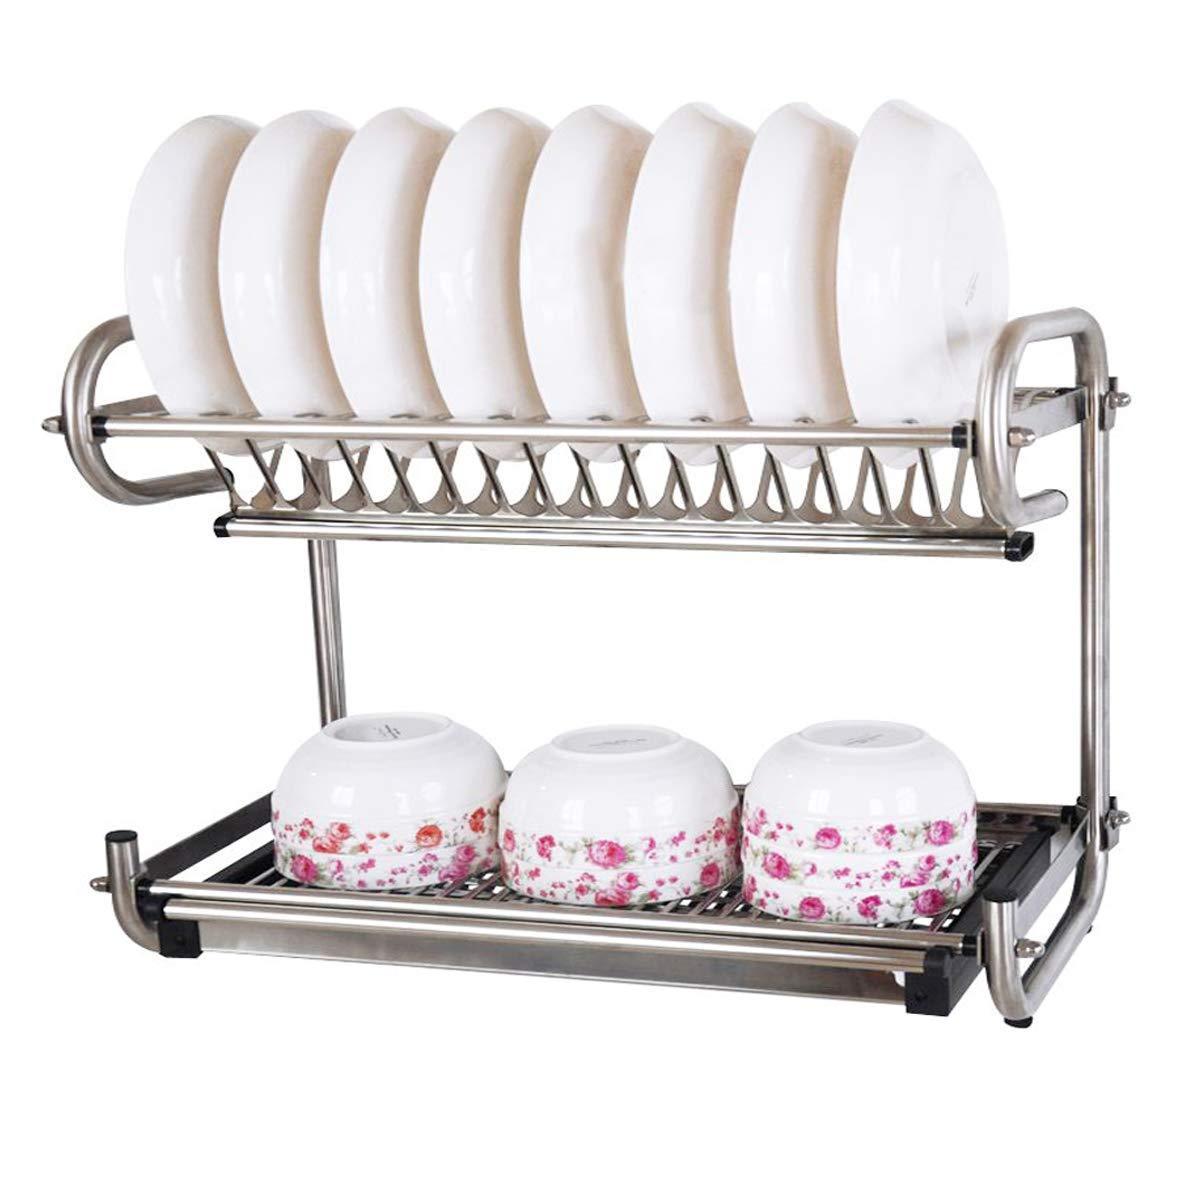 Buy now 23 2 kitchen dish rack 2 tier stainless steel cabinet rack wall mounted with drainboard set dish bowl cup holder 23 2 inch